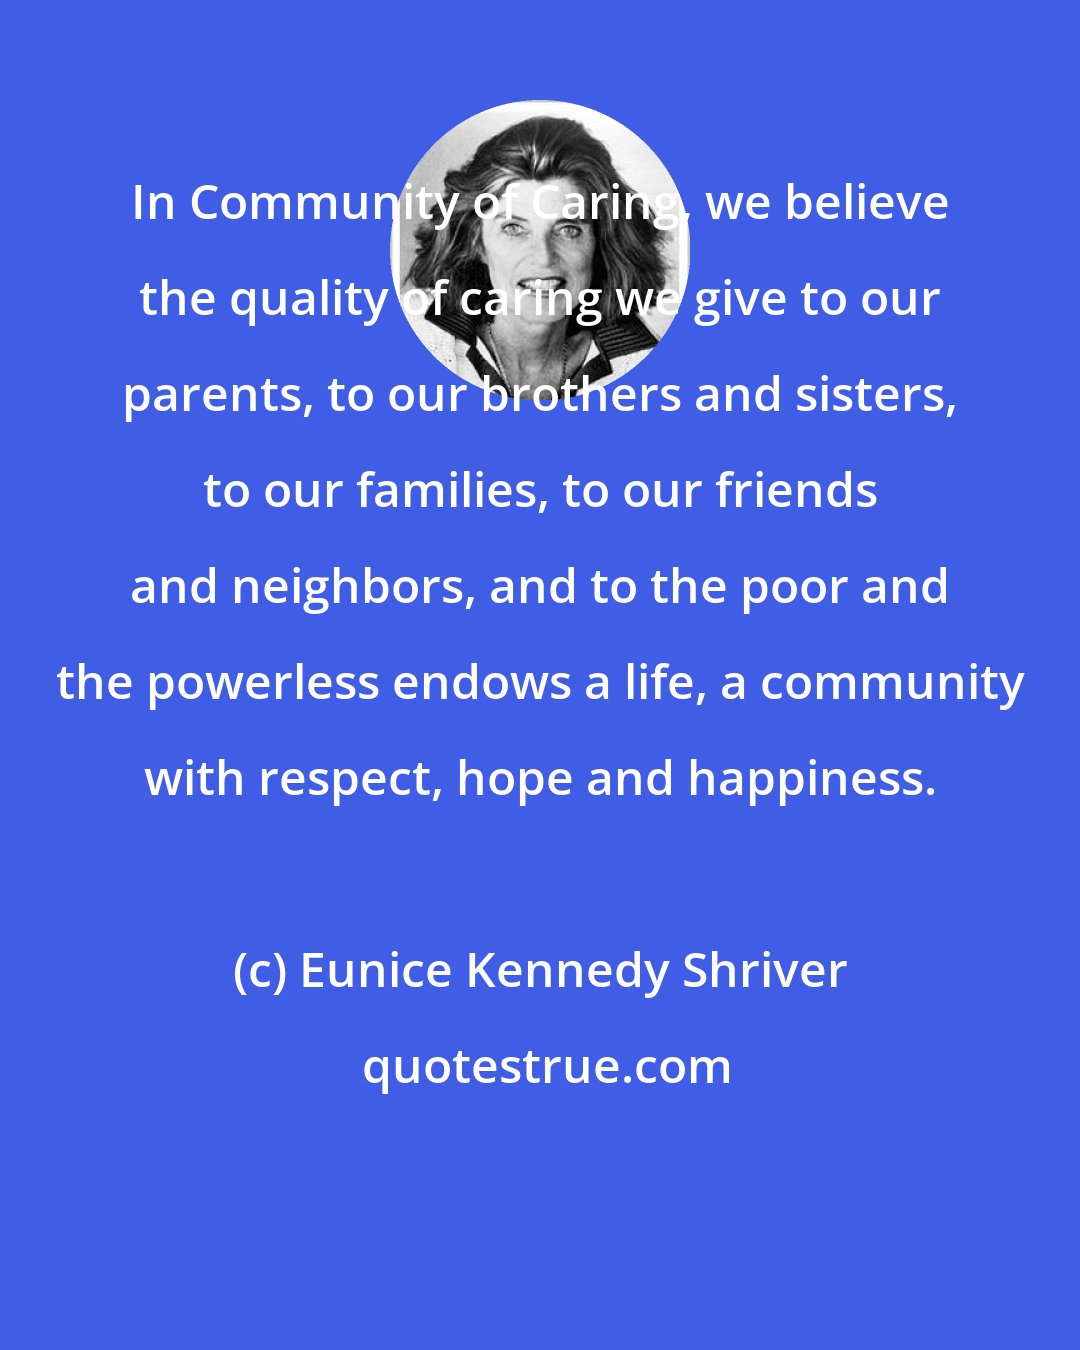 Eunice Kennedy Shriver: In Community of Caring, we believe the quality of caring we give to our parents, to our brothers and sisters, to our families, to our friends and neighbors, and to the poor and the powerless endows a life, a community with respect, hope and happiness.